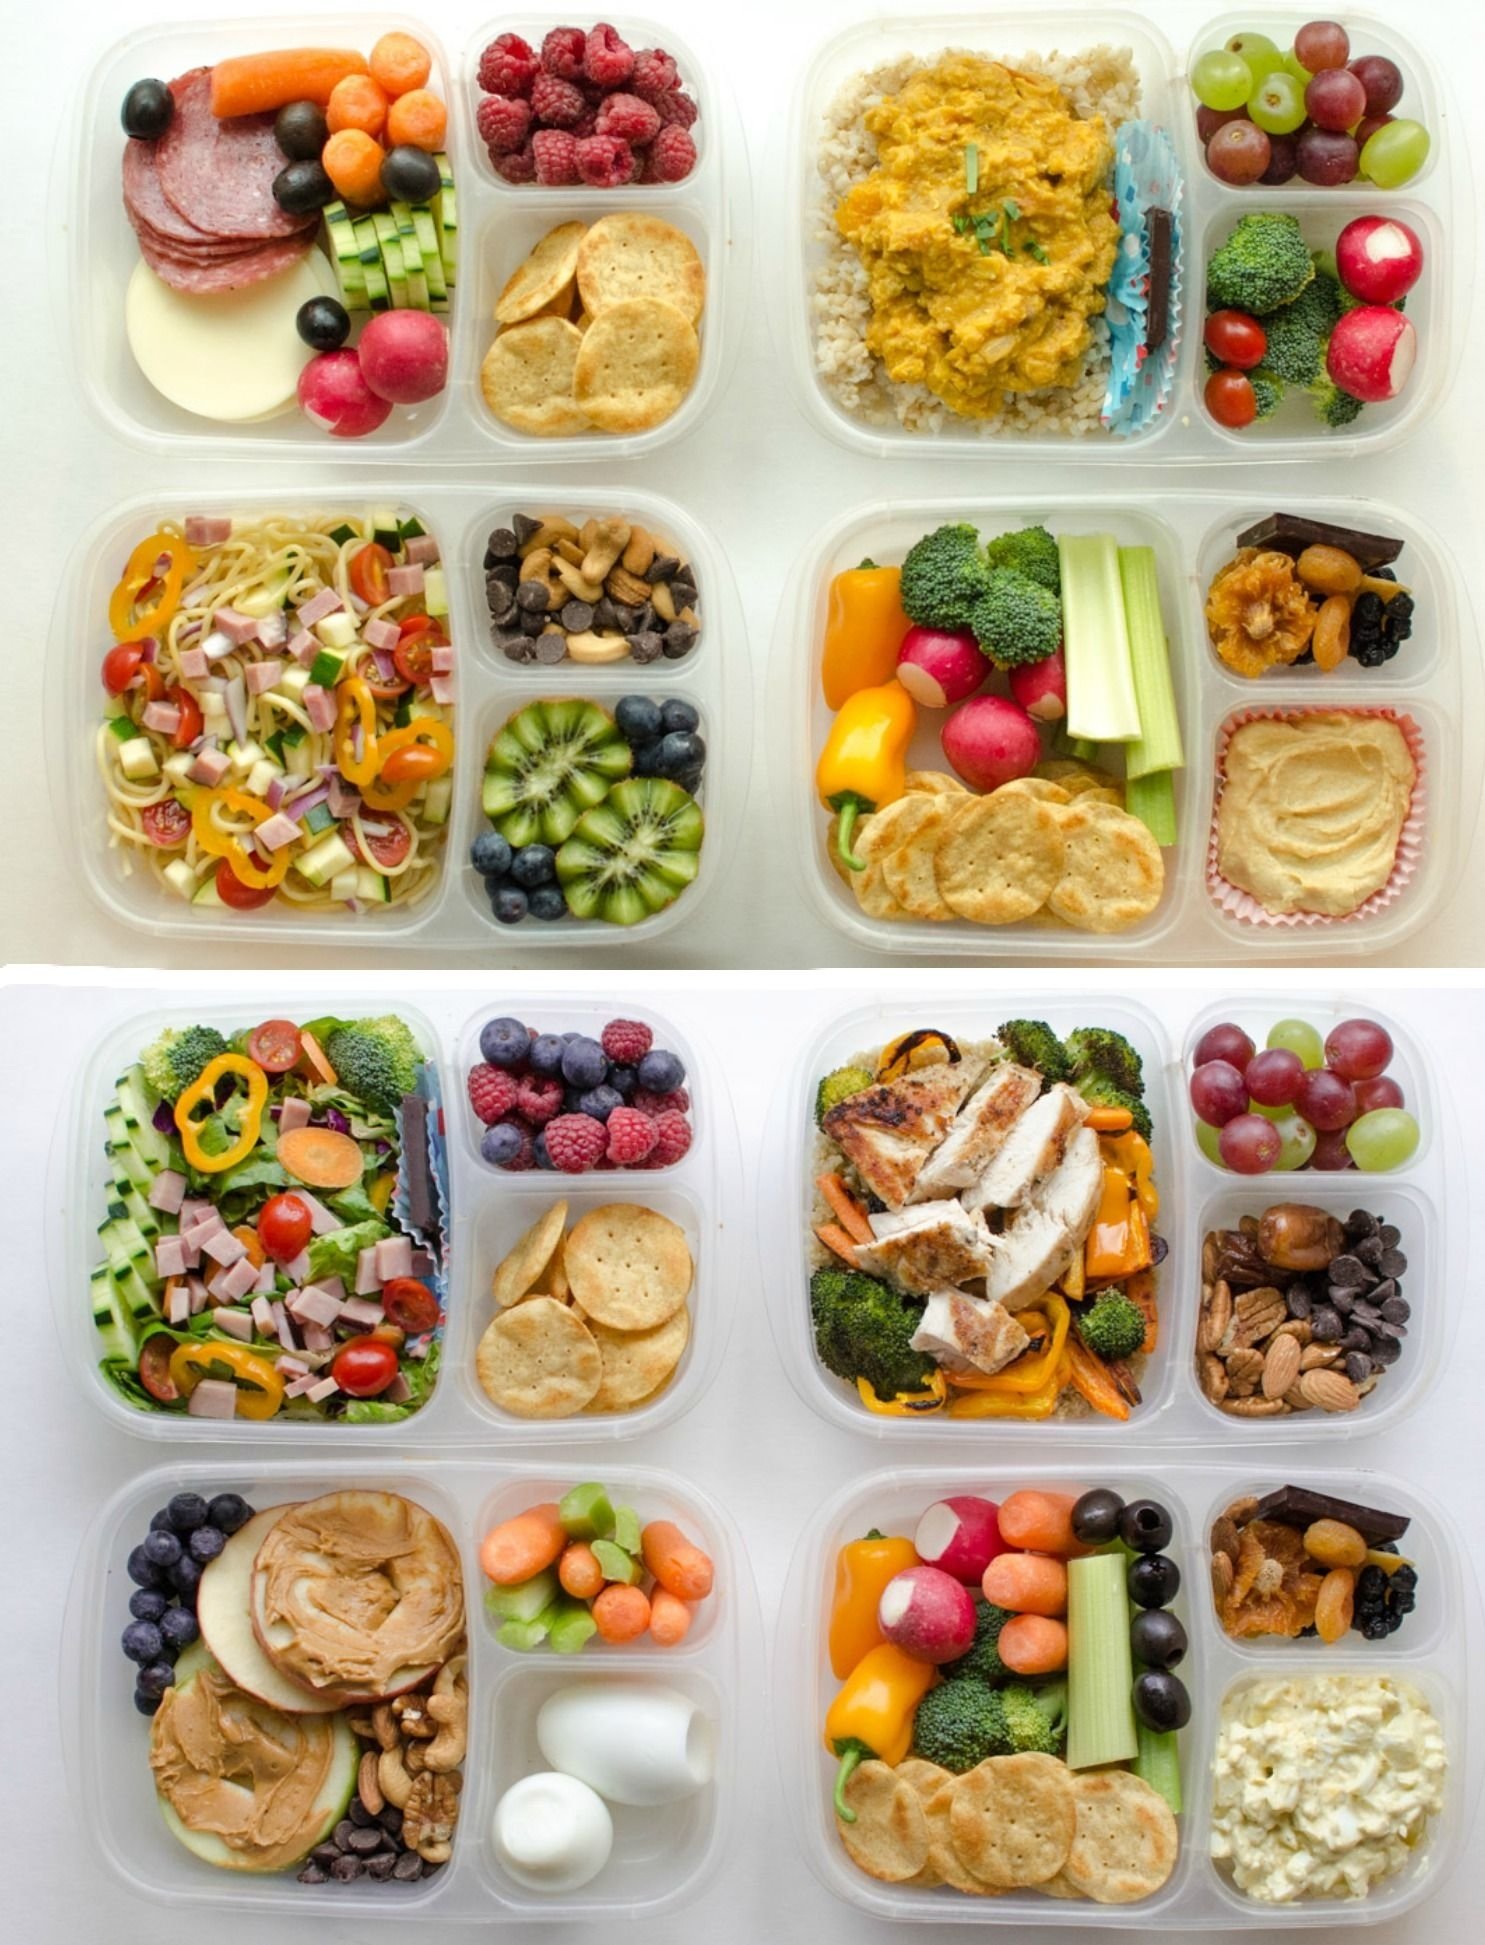 10 Nice Bento Box Ideas For Adults 8 adult lunch box ideas repas idee lunch et recette healthy 2 2022